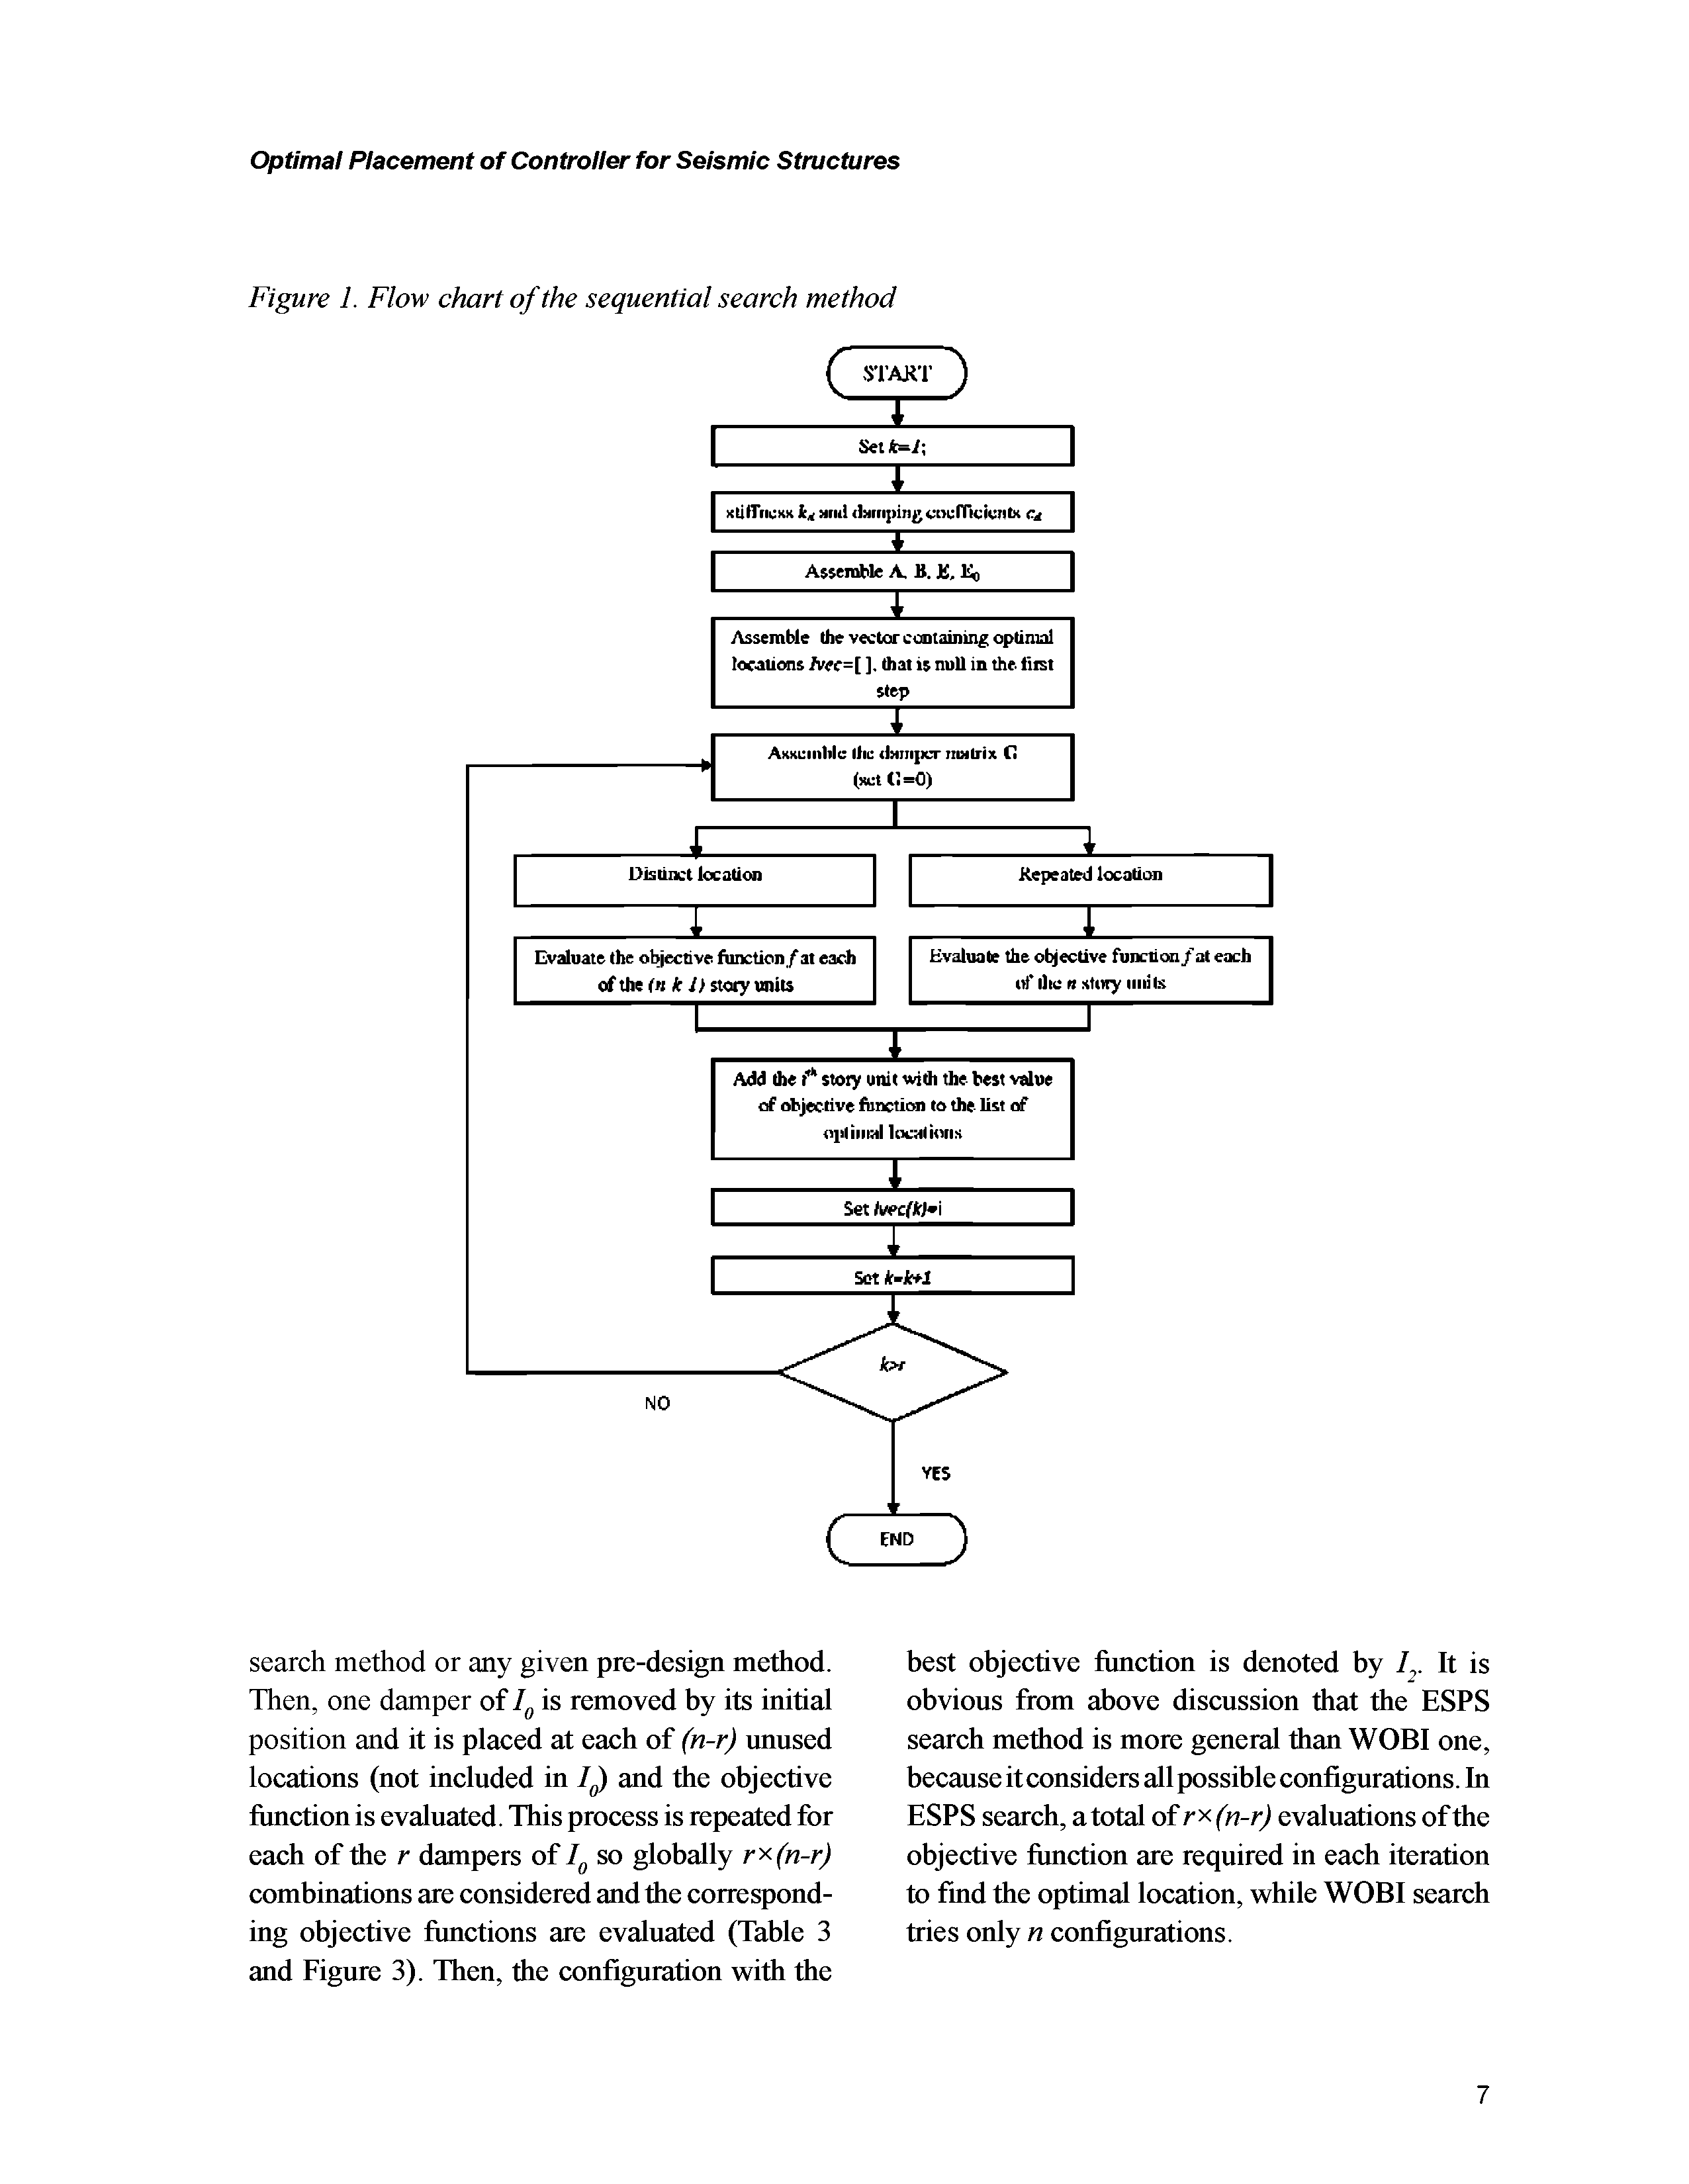 Figure 1. Flow chart of the sequential search method...